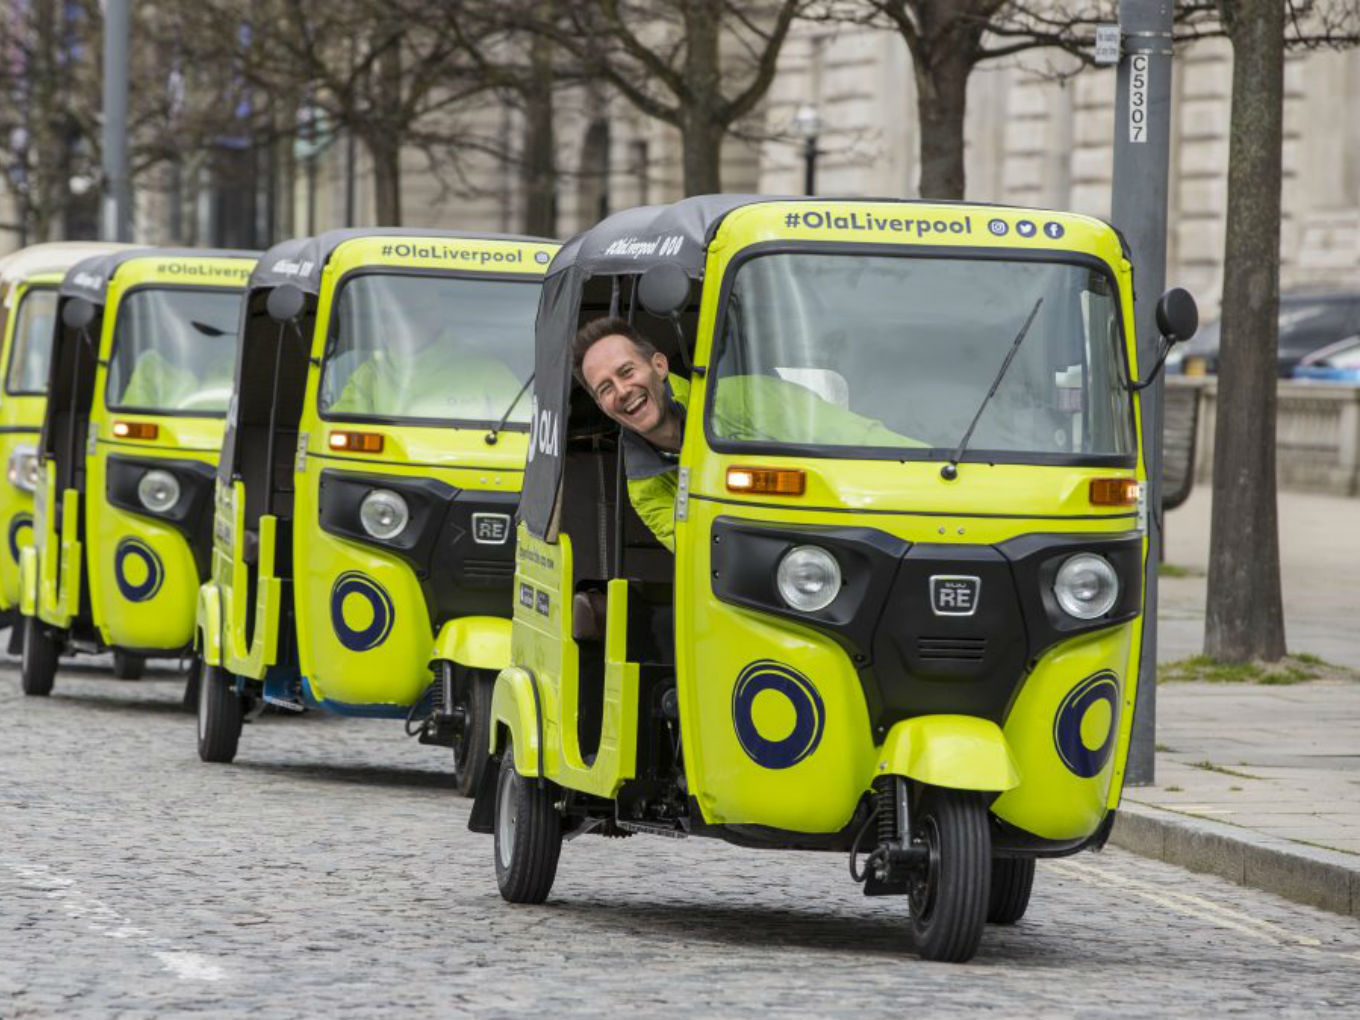 Can Ola’s Expansion Threaten Uber’s Hold On London? Yes, Says Morgan Stanley